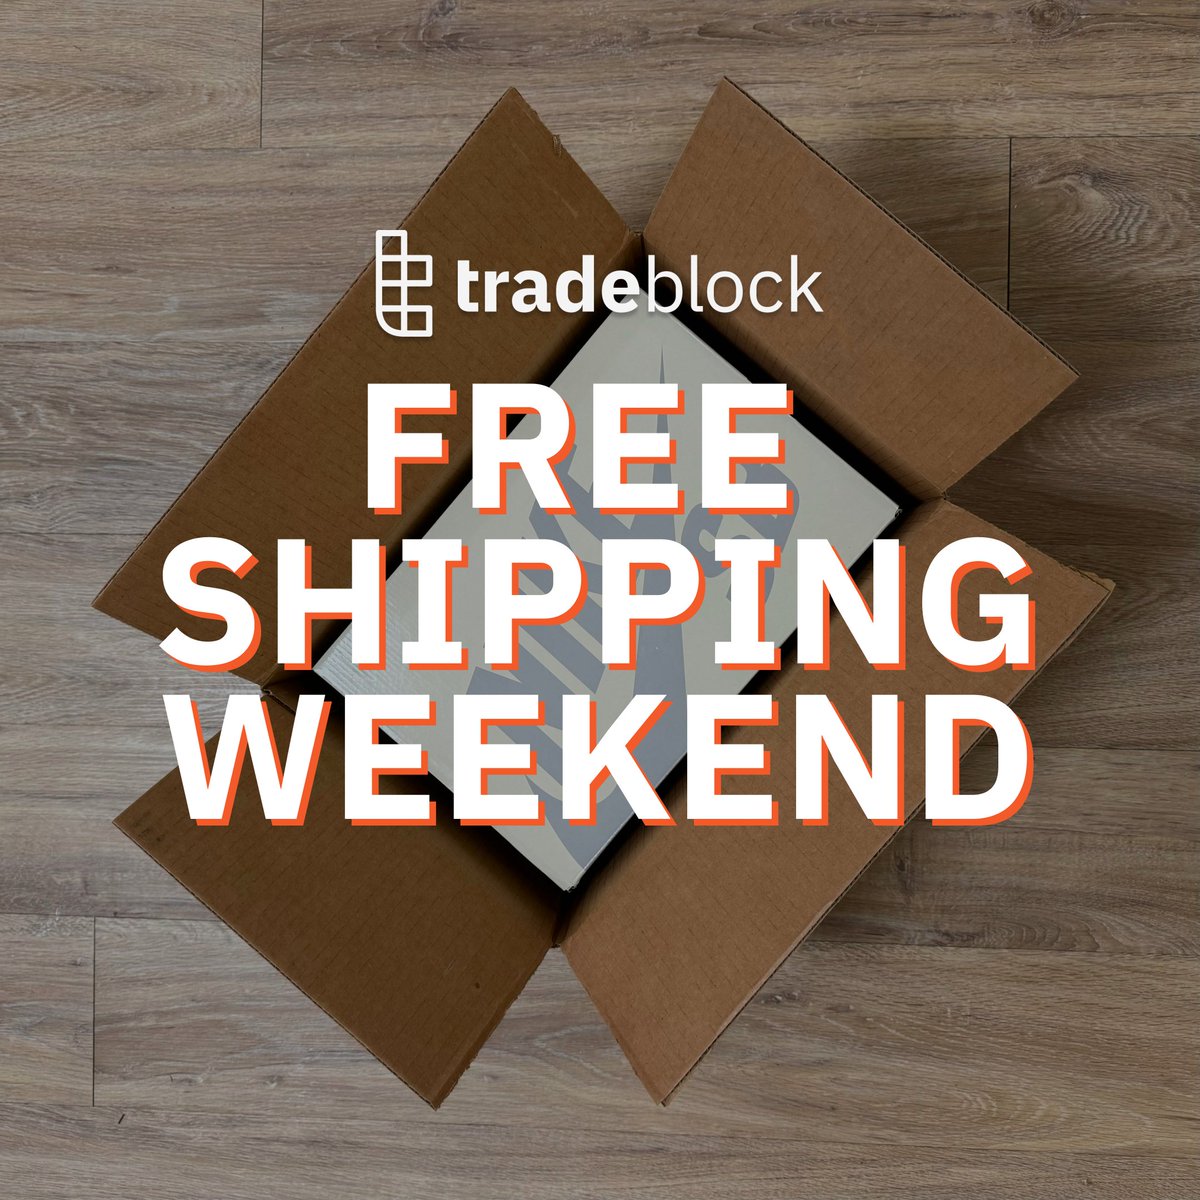 📦Free Shipping is here‼️ To celebrate our new product launch, we’re running free shipping this weekend: Friday, Jan. 26th – 28th. Get your trades in! -$15 discount applied at checkout! If you've been holding out on offers, now’s the perfect time to take advantage!